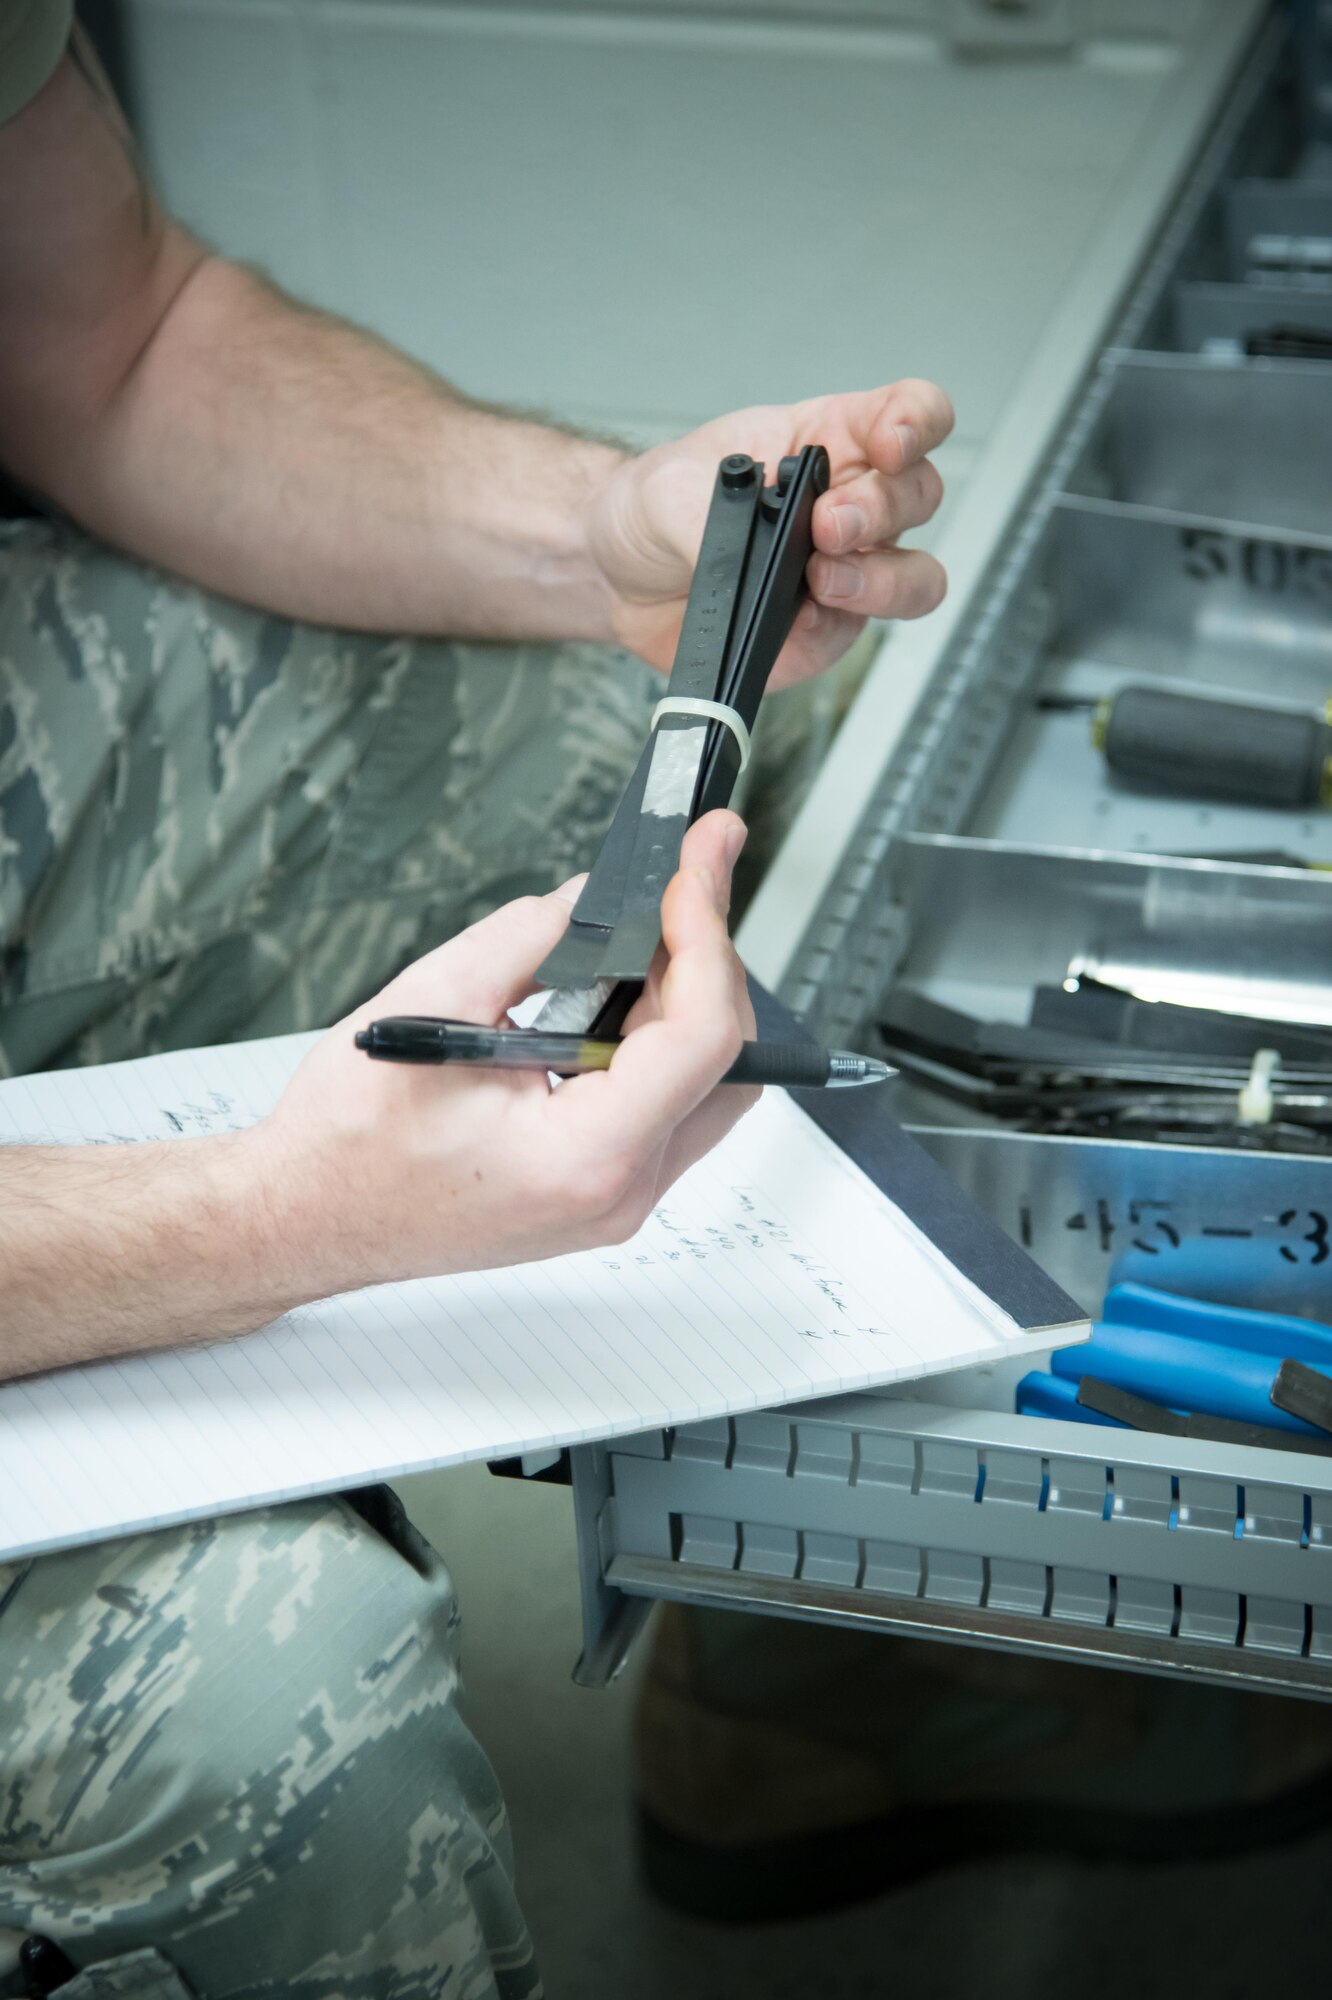 Master Sgt. Steven Twinn, 403rd Fabrication Flight aircraft structural master craftsman, completes tool inventory Feb. 1 at Keesler Air Force Base, Mississippi. (U.S. Air Force photo/Staff Sgt. Heather Heiney)